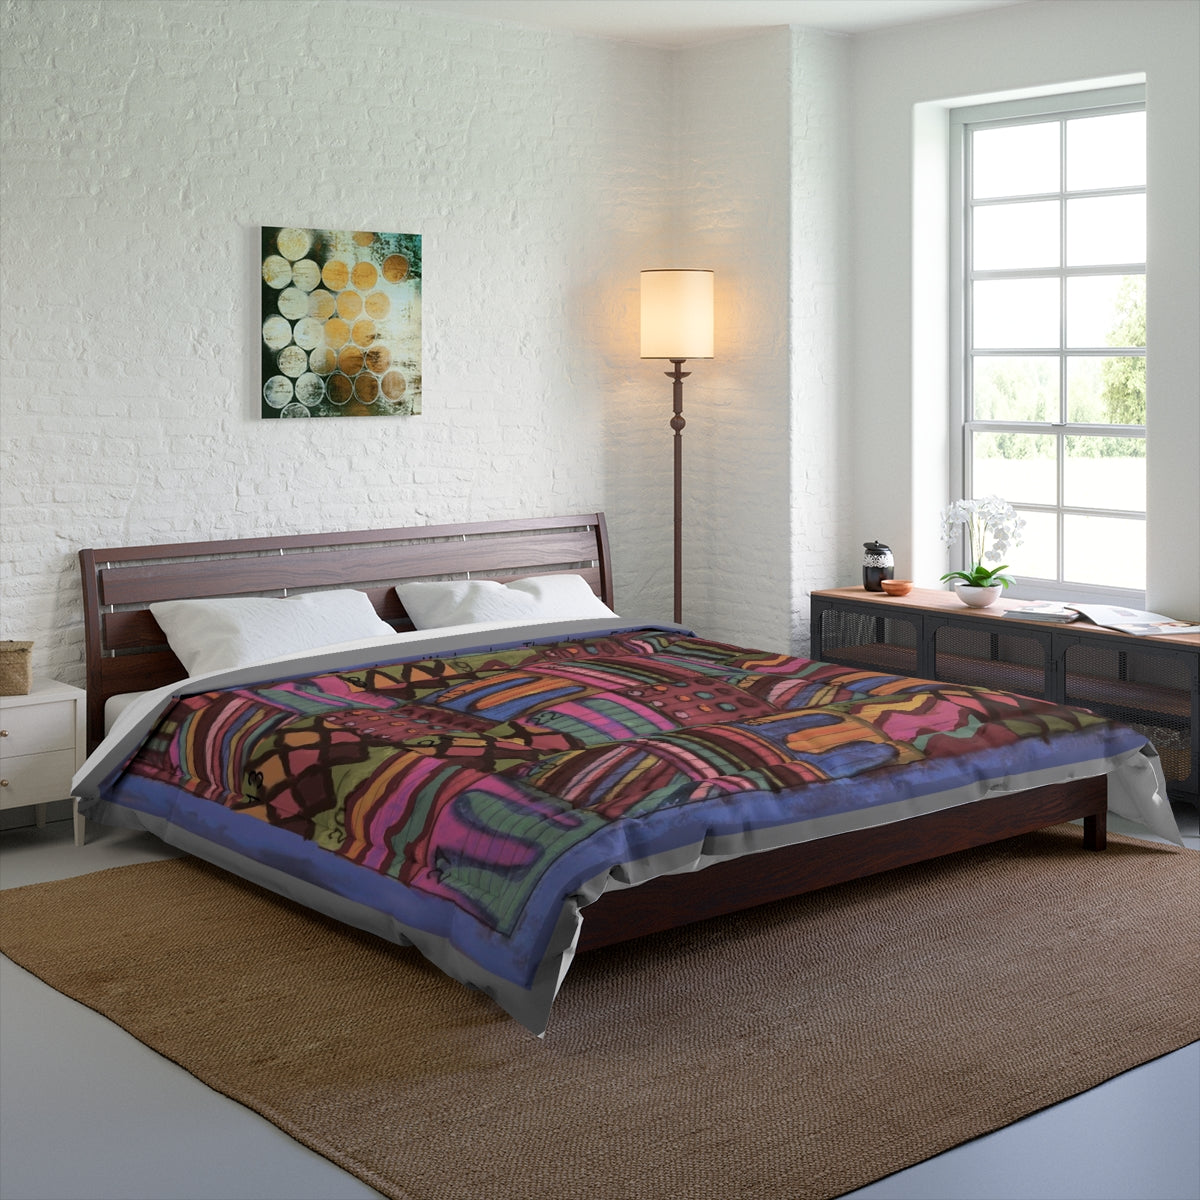 Comforter: Psychedelic Calendar(tm) - Muted - 104x88 - MiE Designs Shop. Barely visible gray edges around calendar. Bedroom